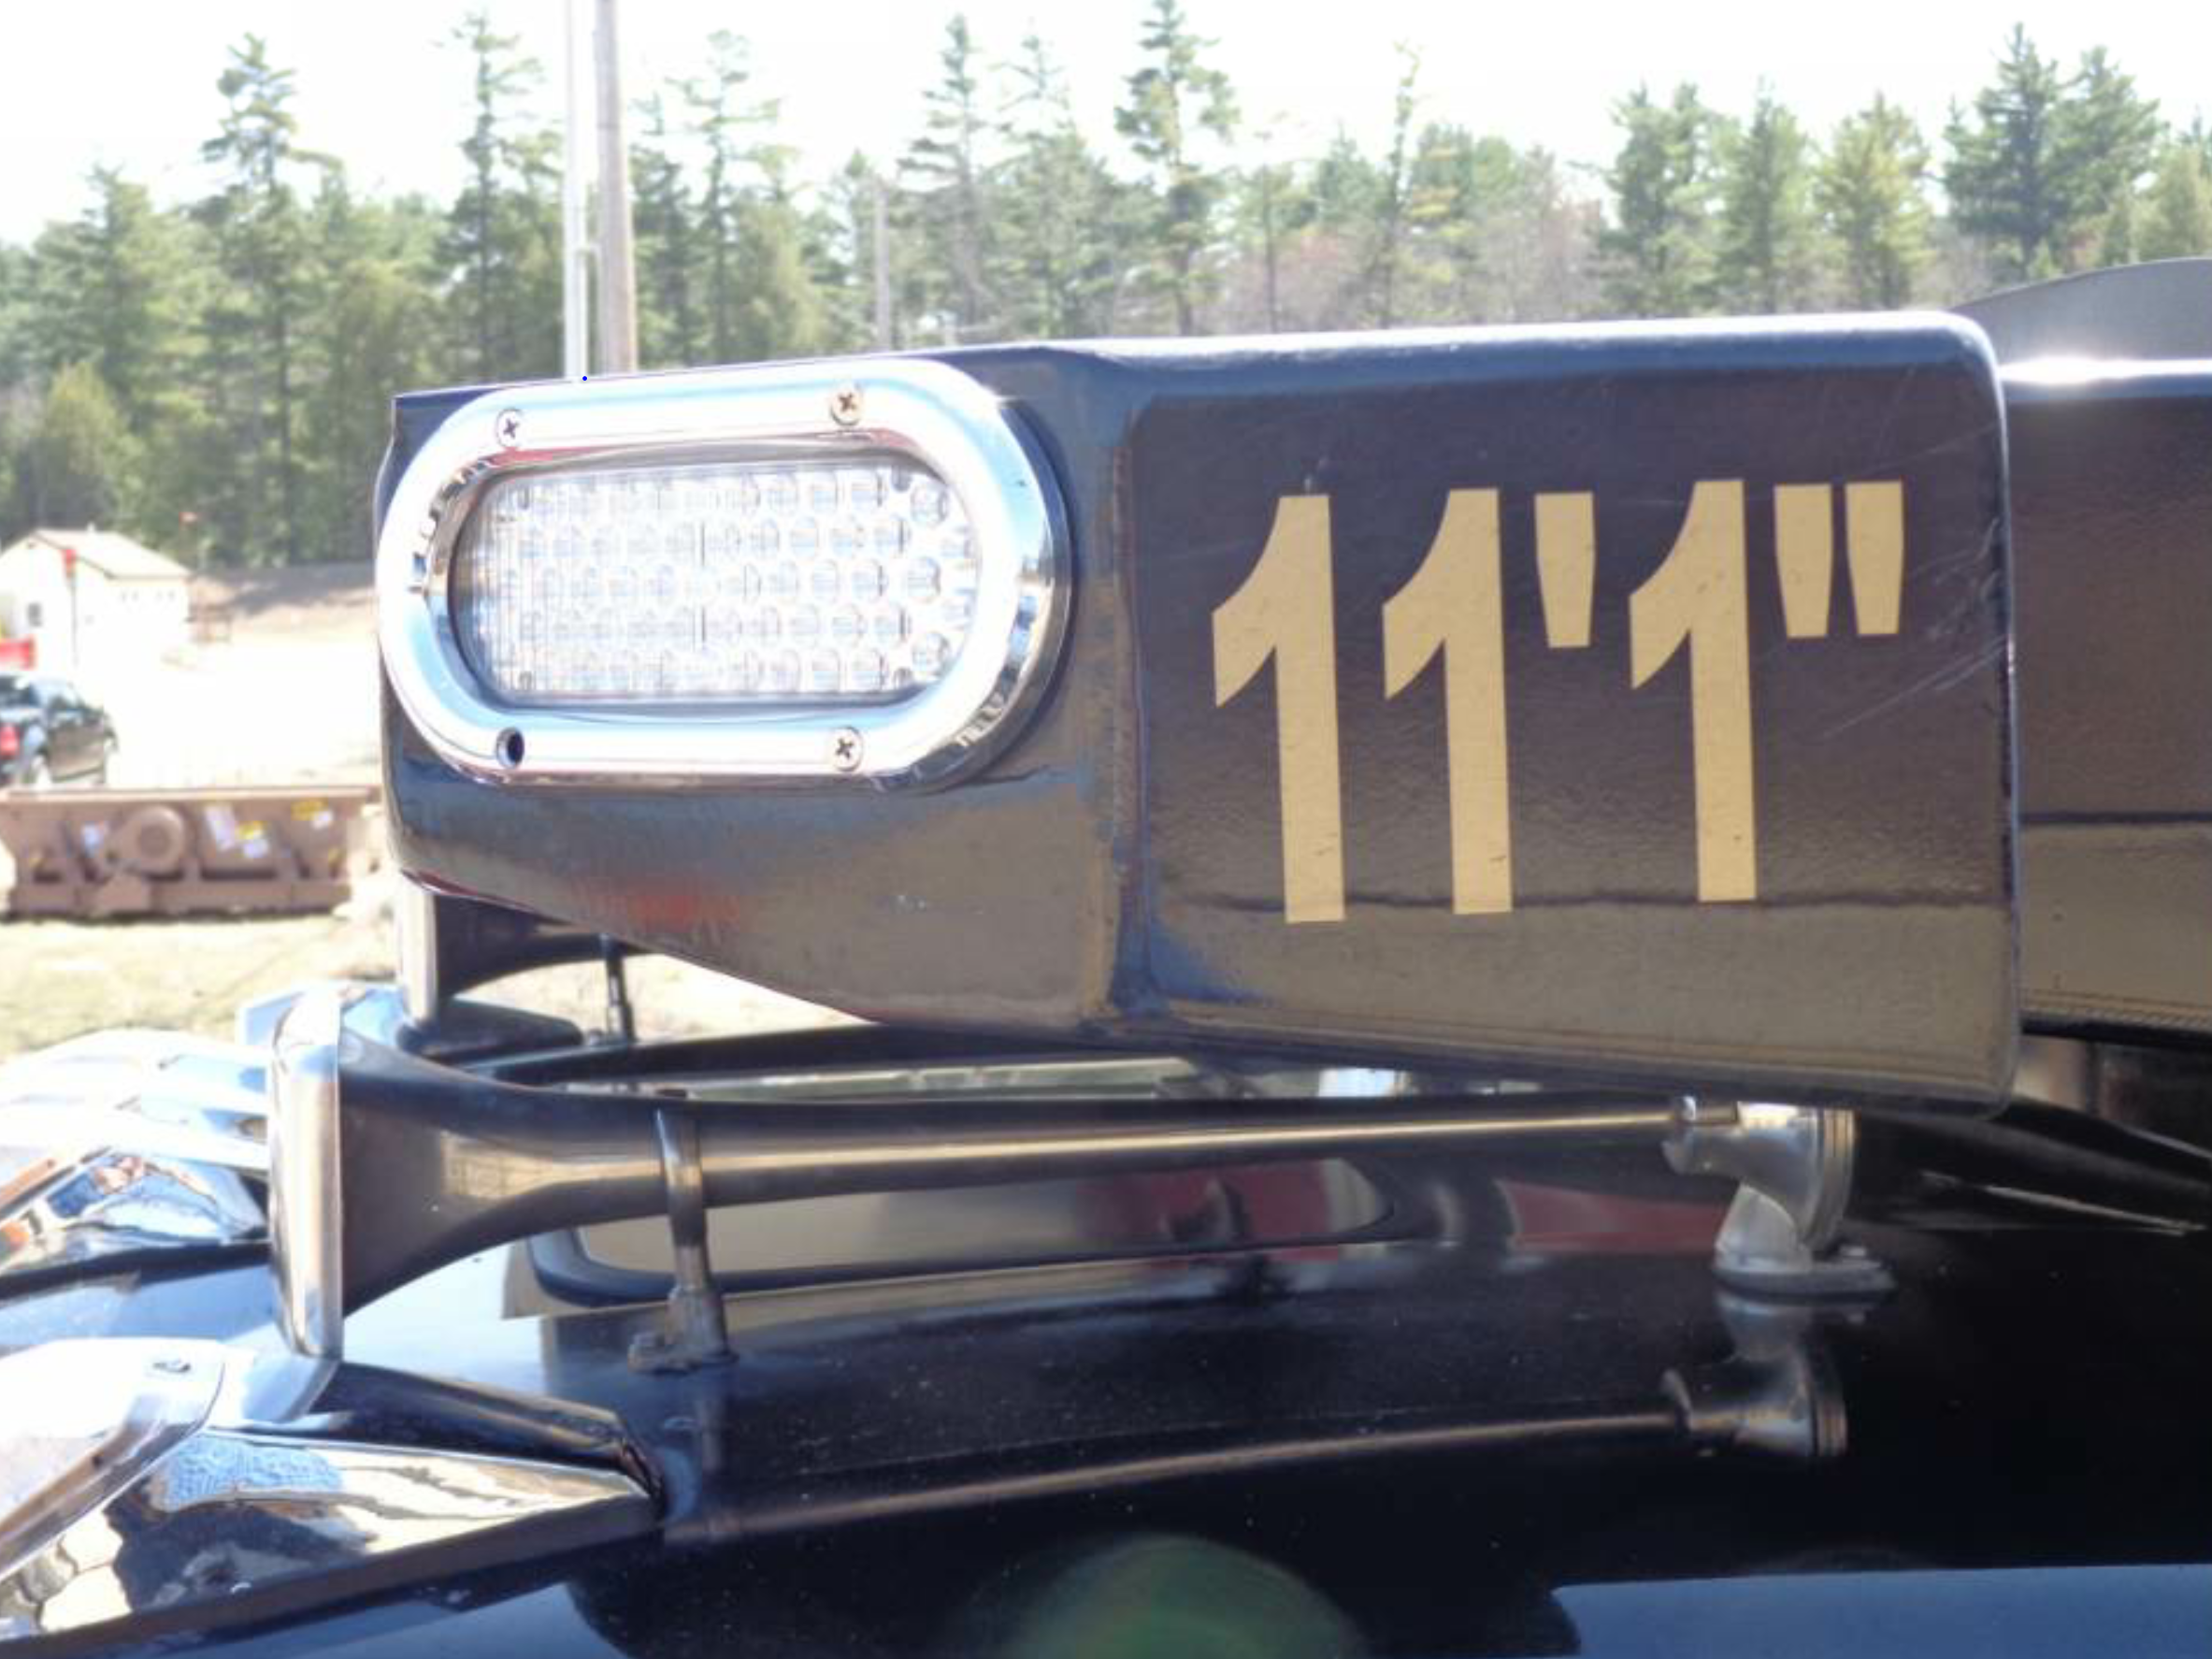 Also notice the height of the body is marked directly on the vehicle, and Murray has an LED at the top of the body. As the body rises to let mix charge the hopper, the light also rises. The light goes up with that corner of the body, making it apparent to everyone where the edge of the truck body is at all times.